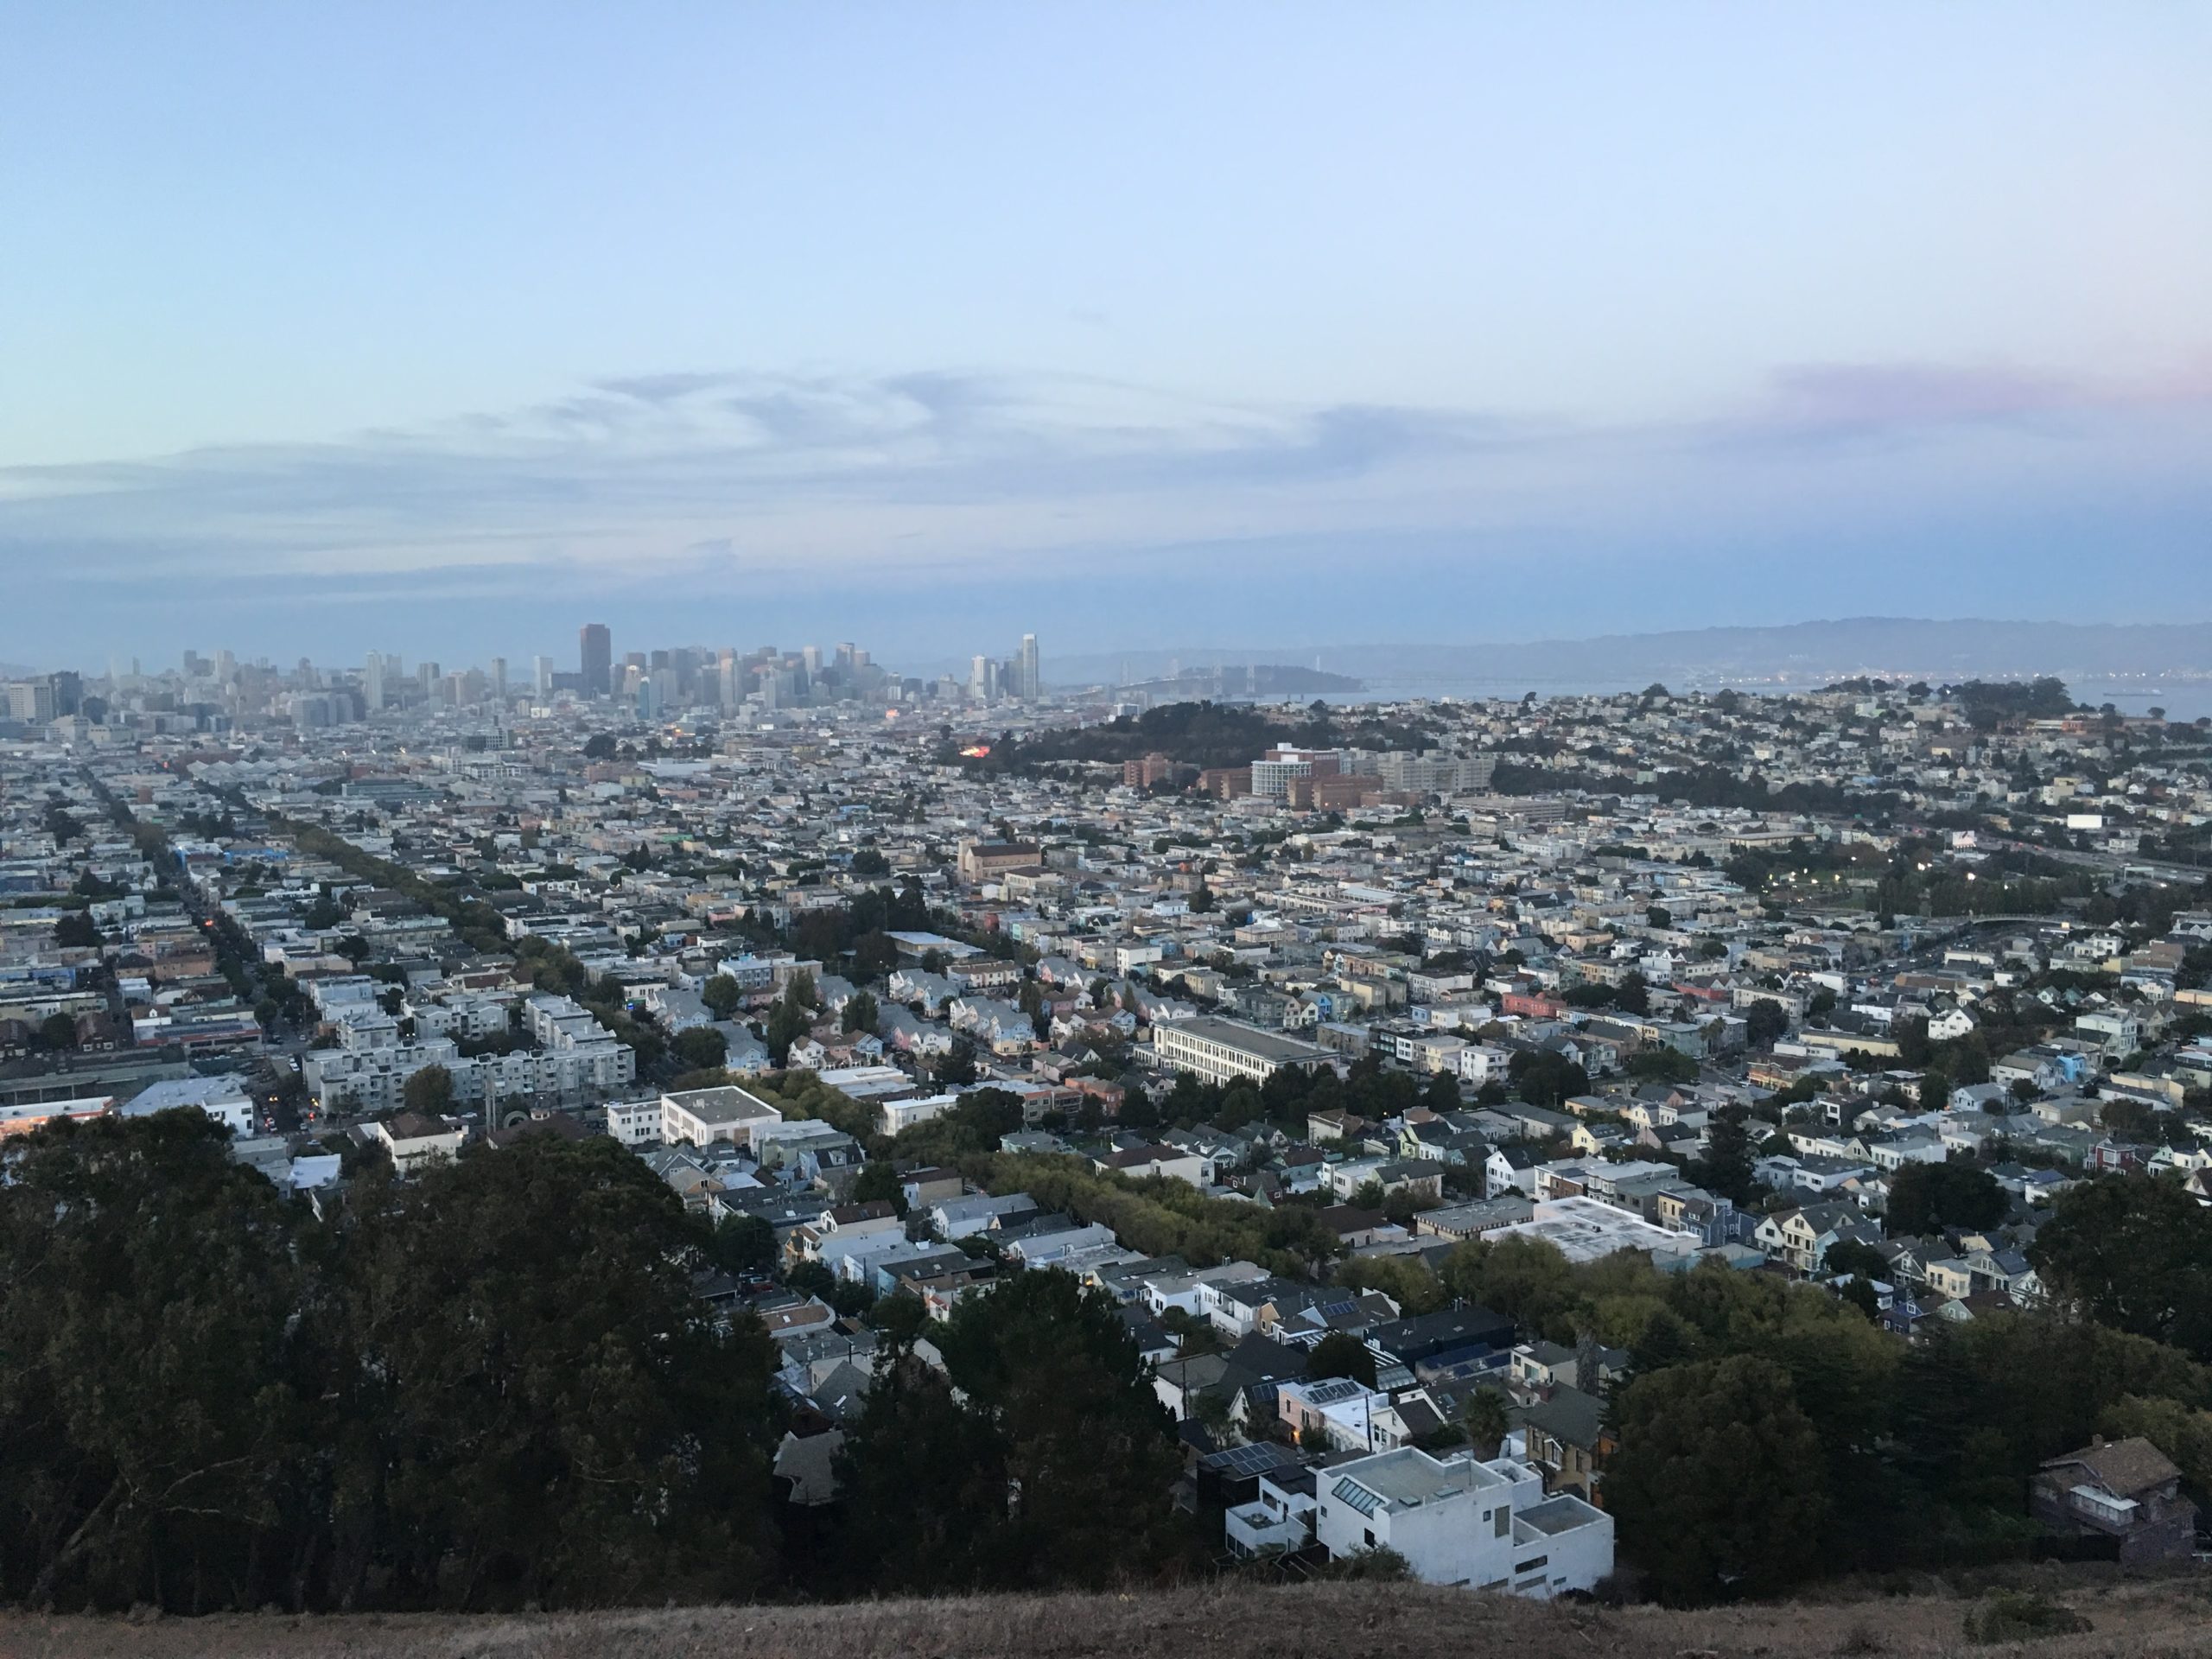 Bird's eye view of San Francisco from Tank Hill Park